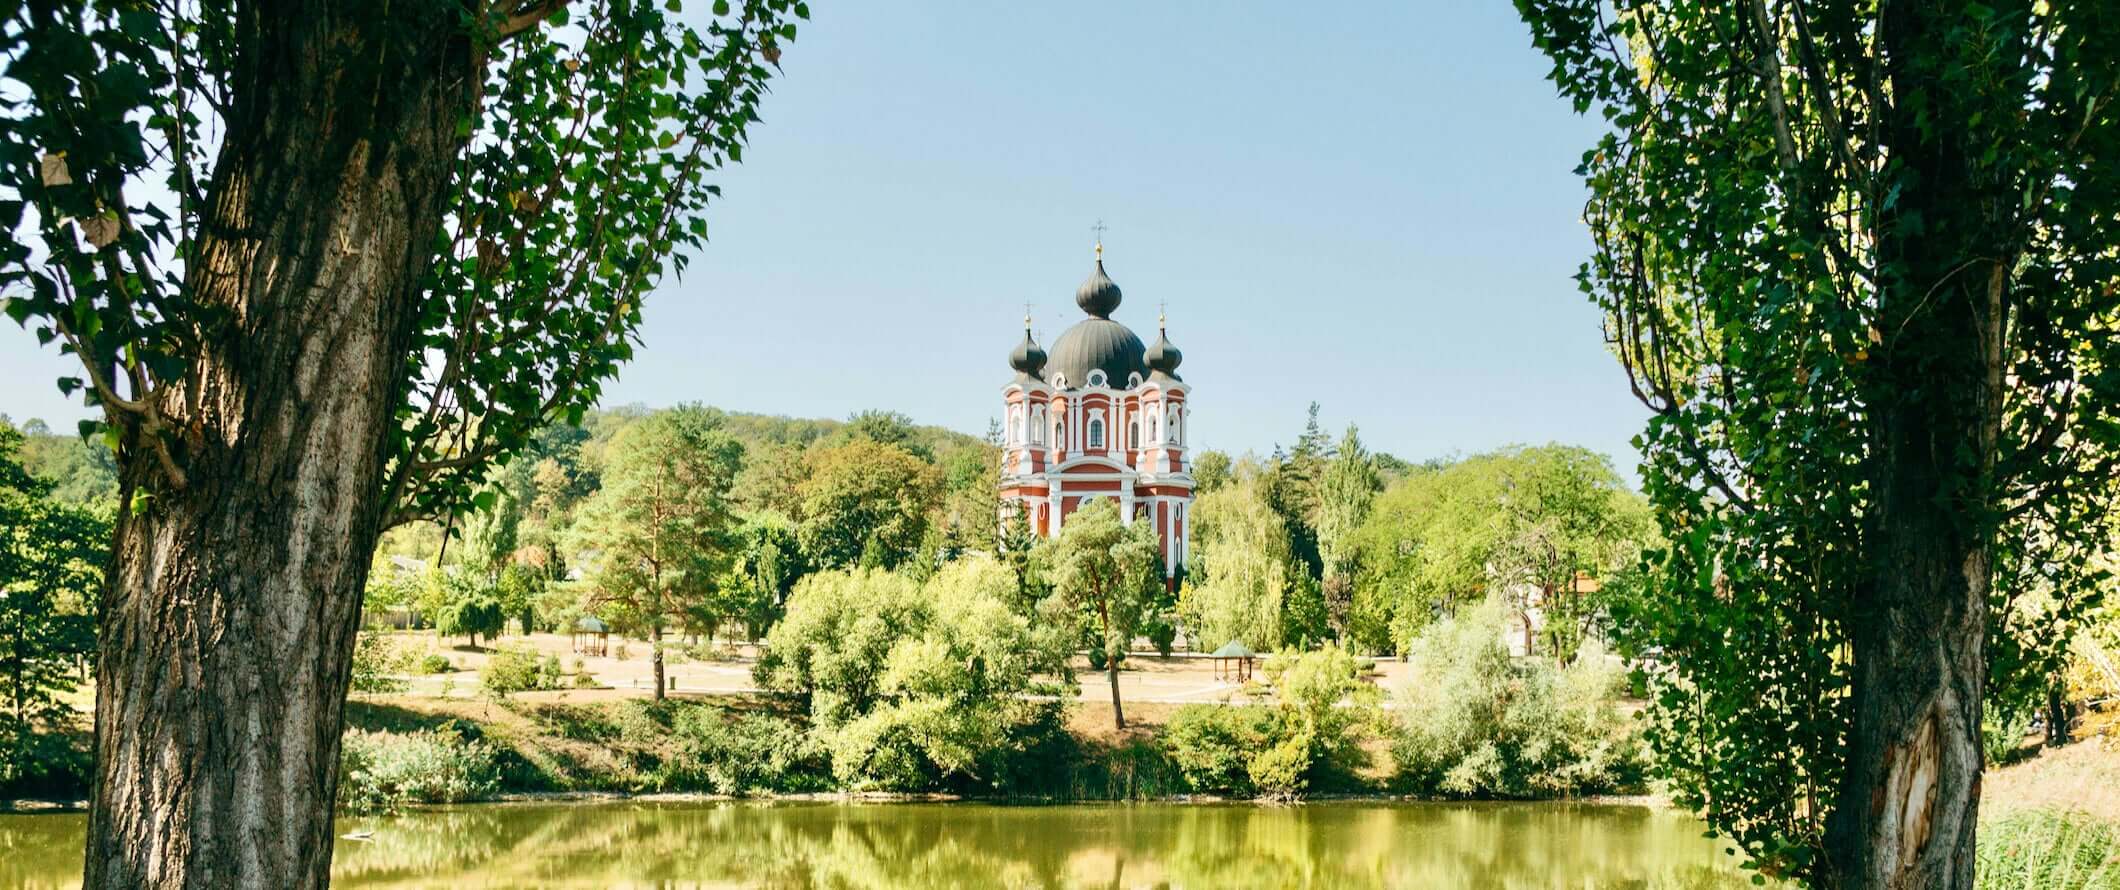 A famous church in Moldova towering between the forests